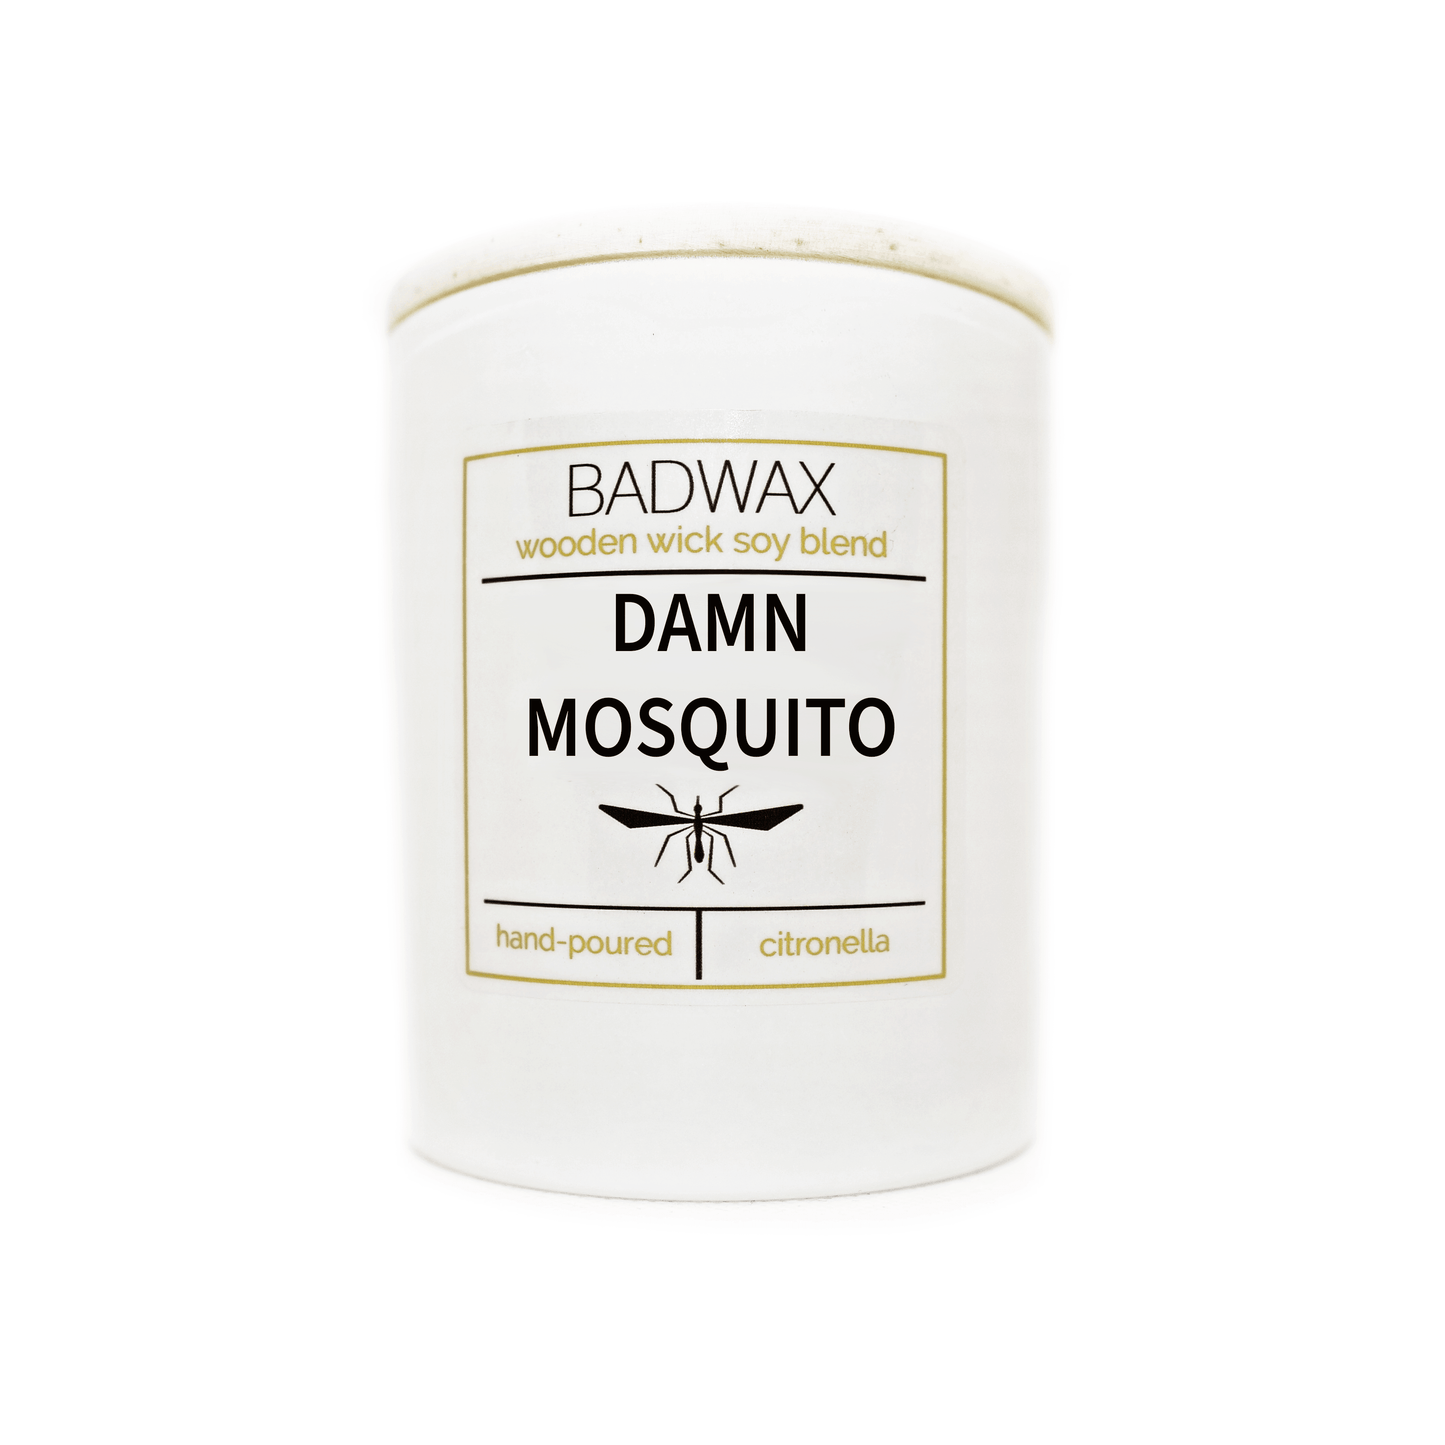 Damn Mosquito | Citronella - Woodwick Candle - BADWAX